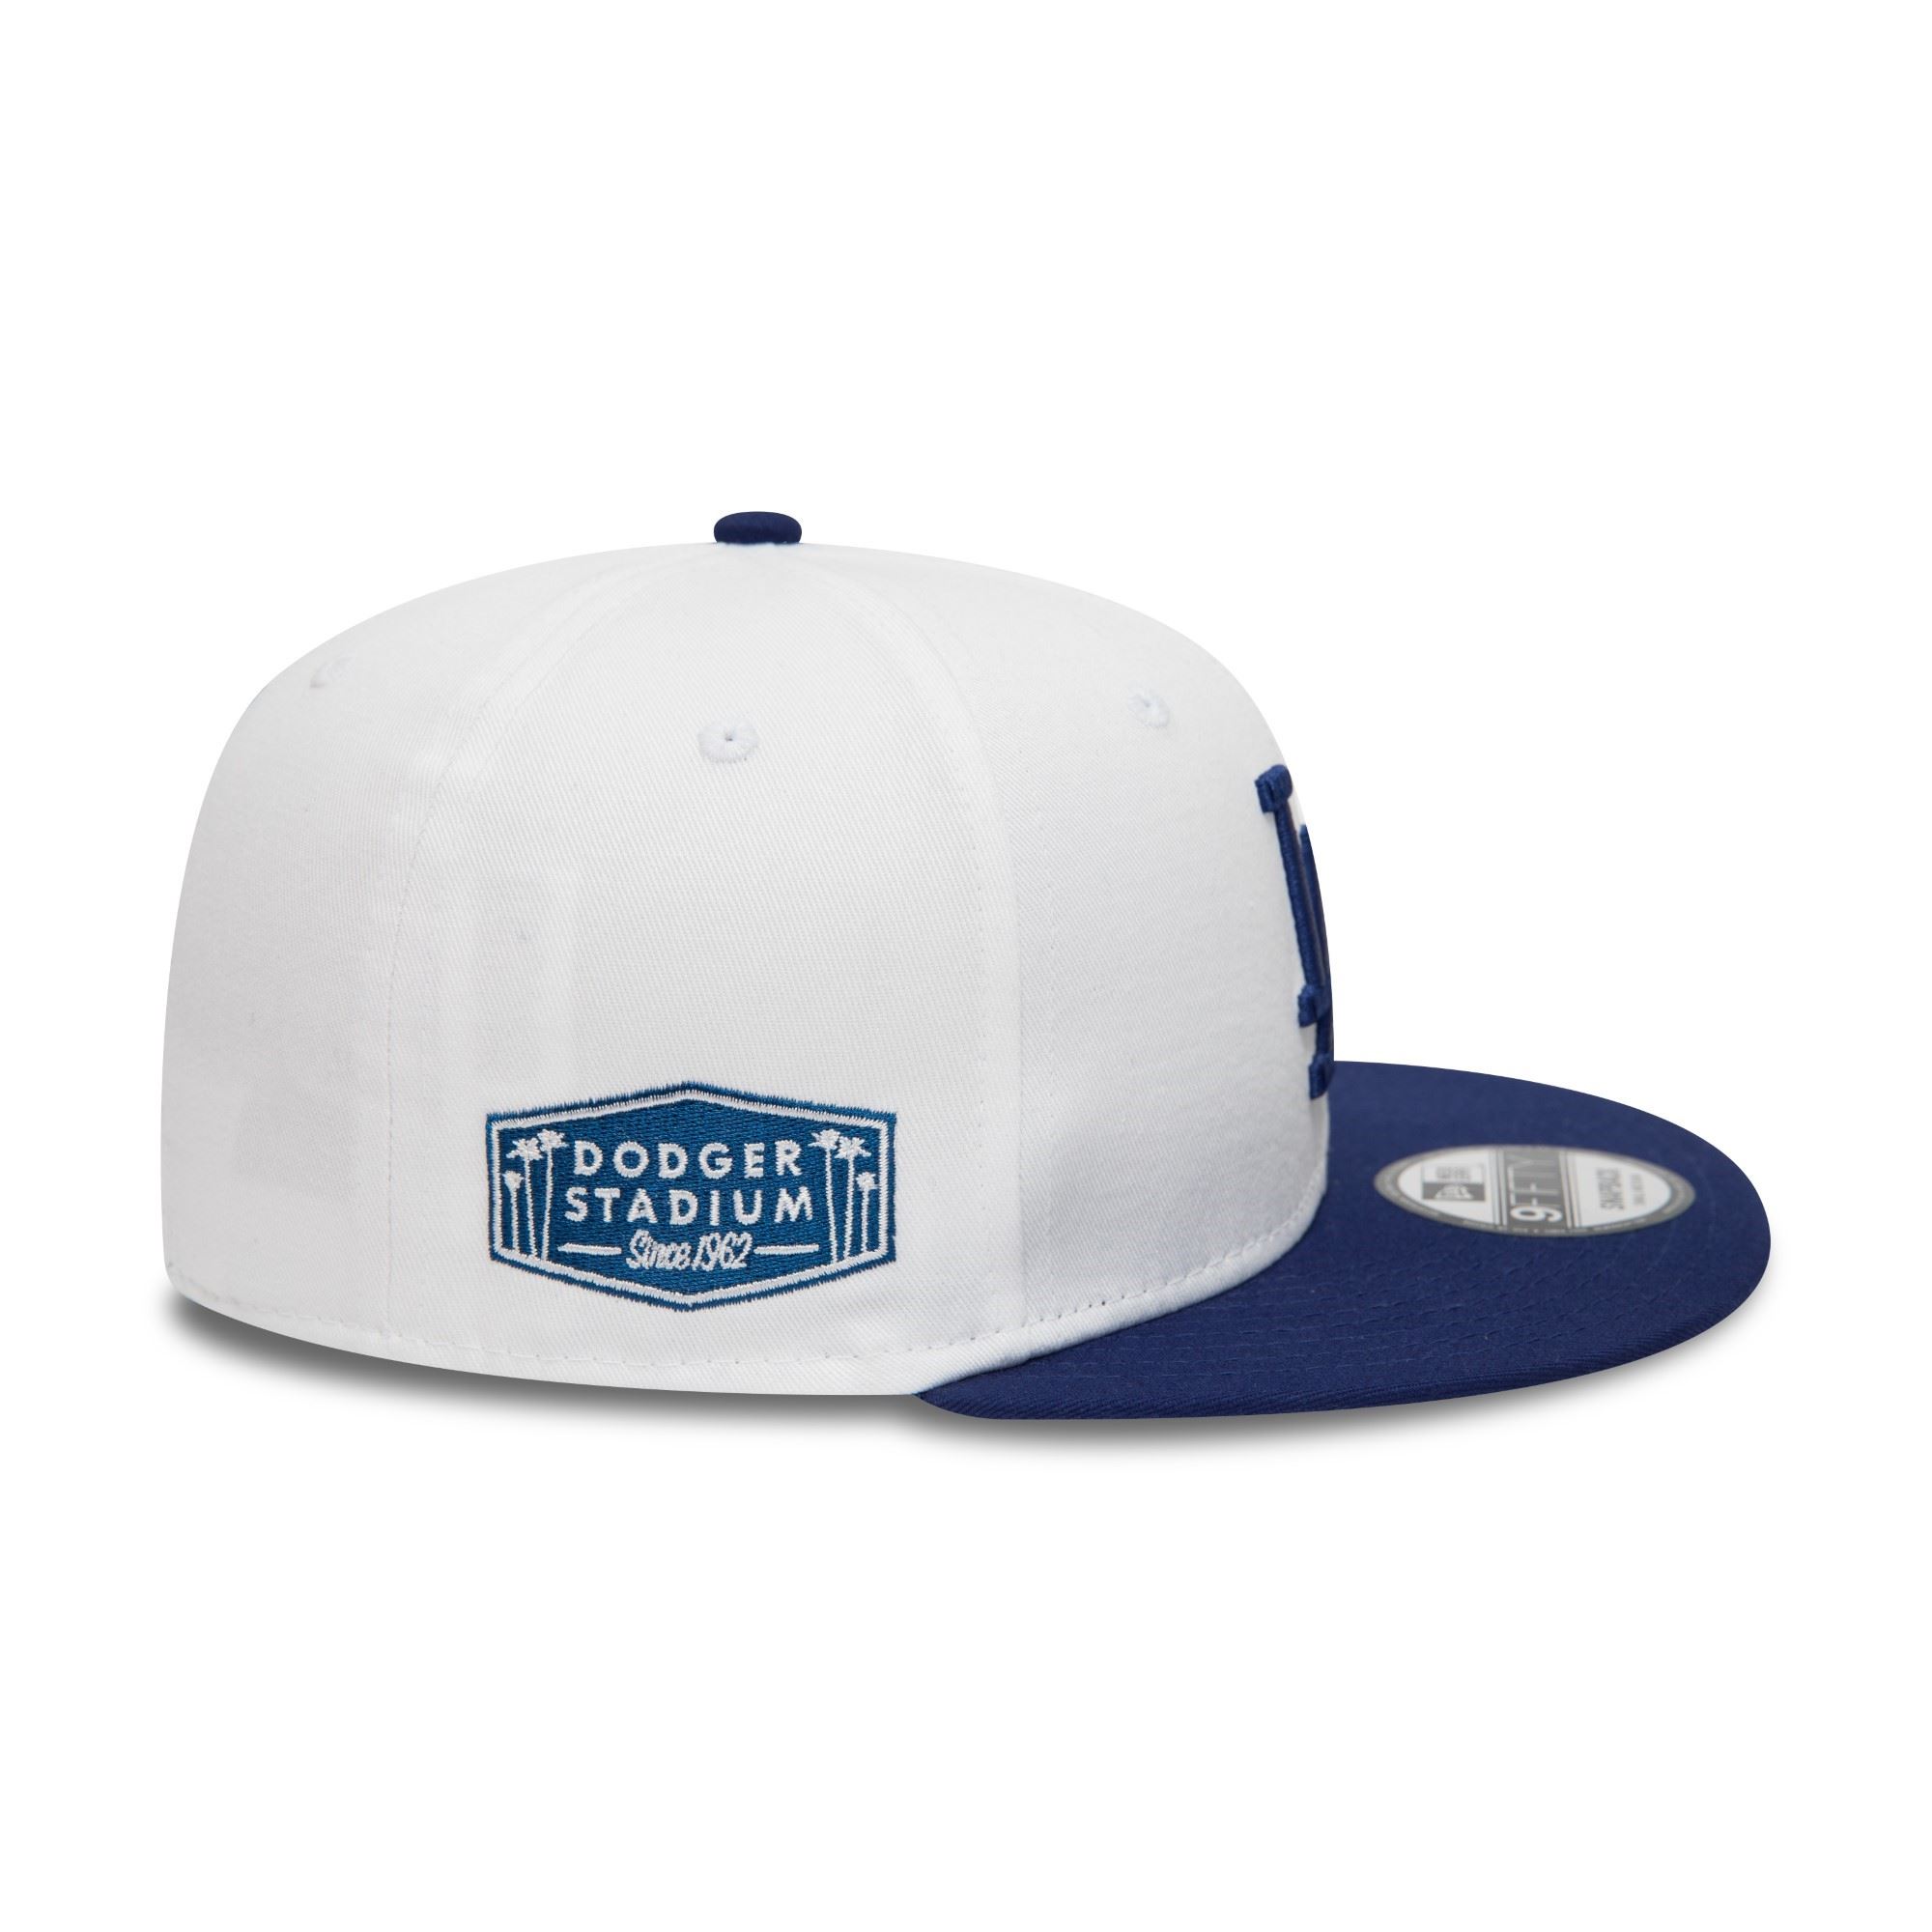 Los Angeles Dodgers MLB White Crown Patches White 9Fifty Snapback Cap New Era